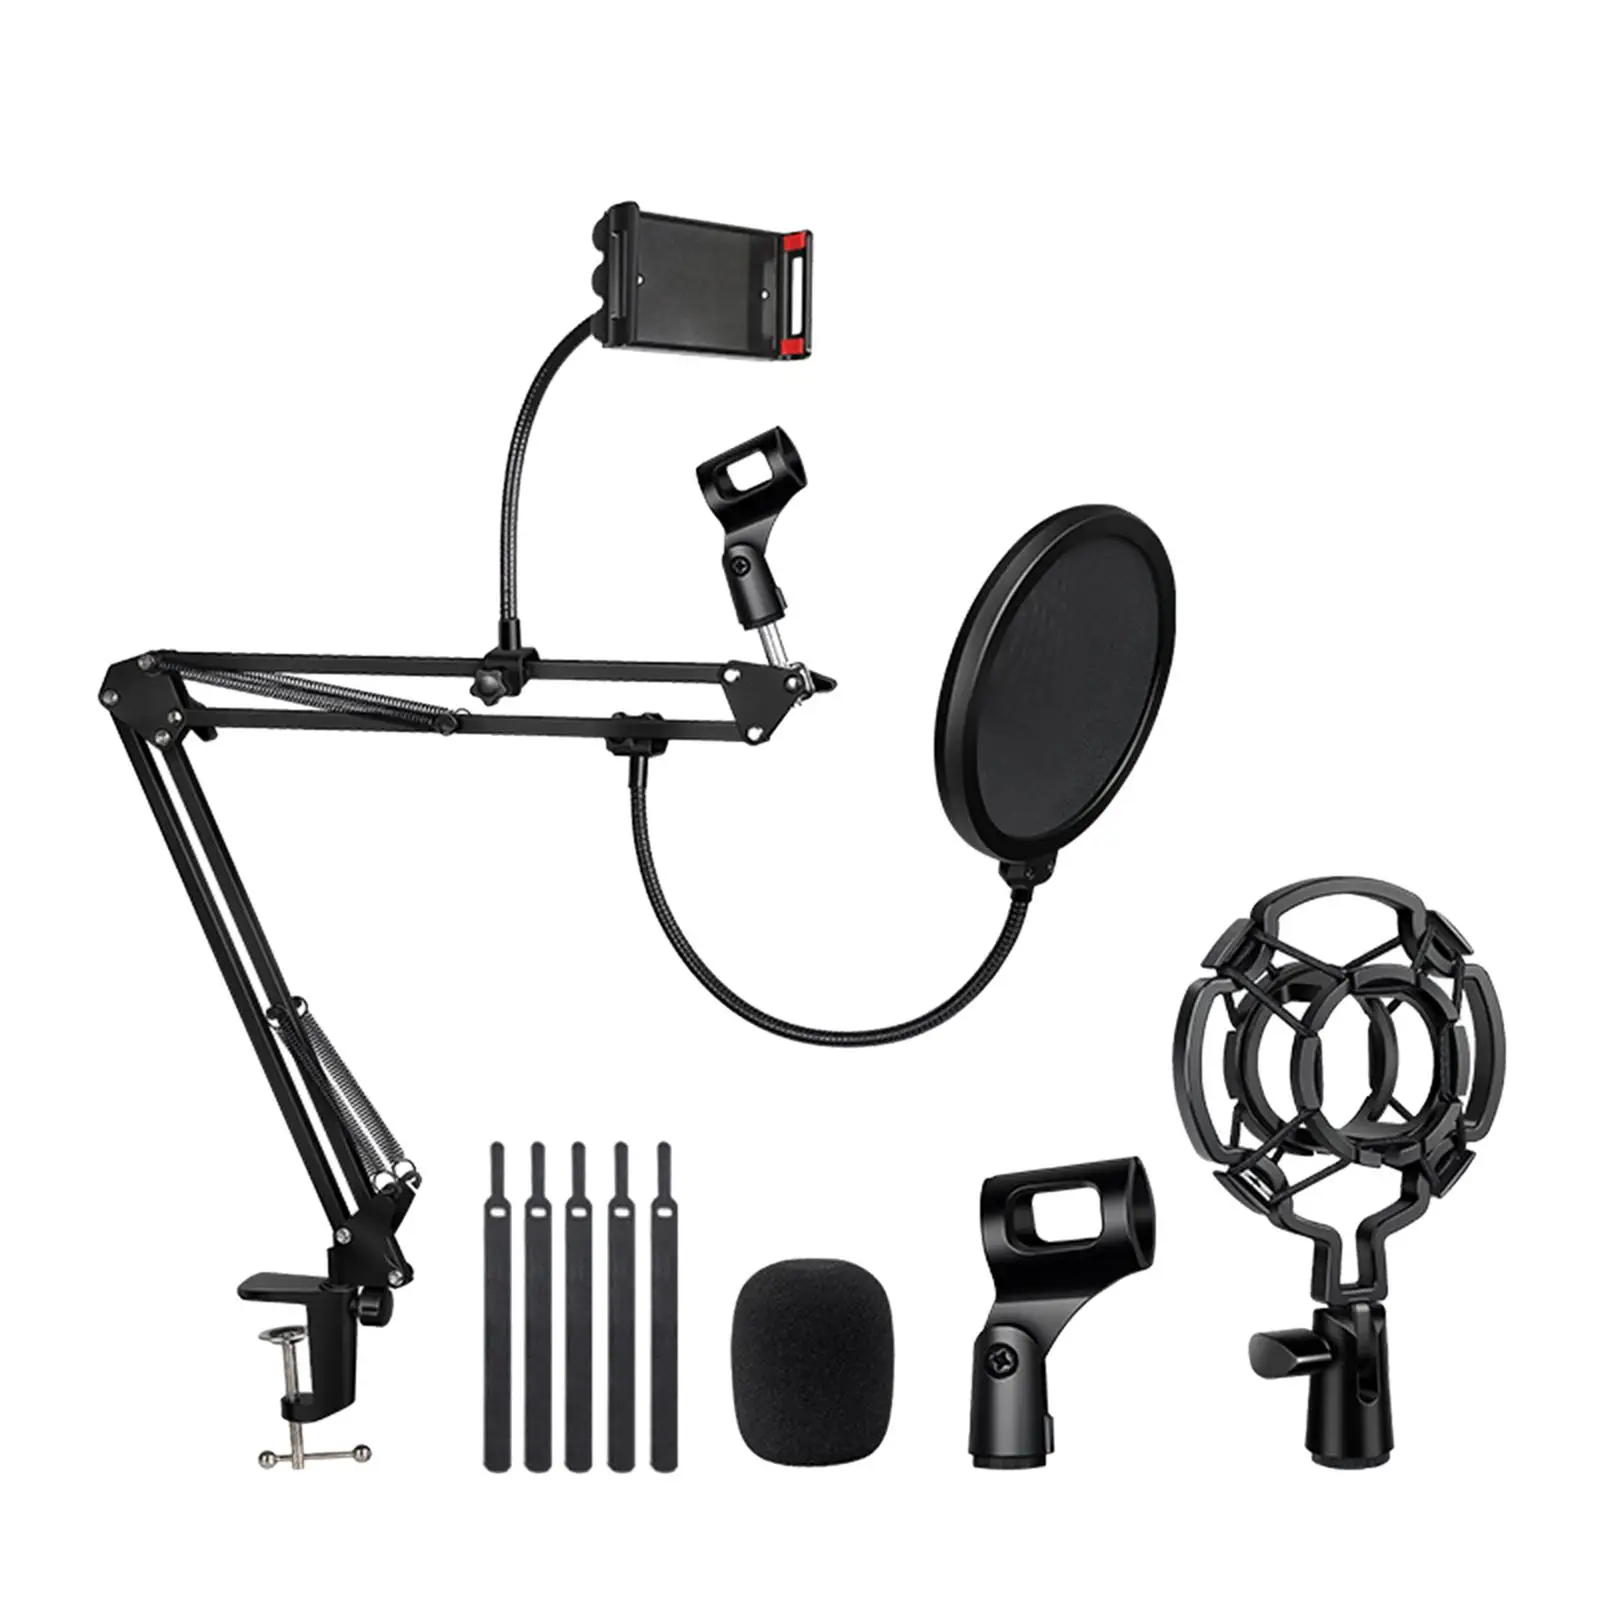 Microphone Stand Kit NB35 Scissor Arm with Microphone Clip Professional Recording Equipment Clip Holder for Condenser Microphone